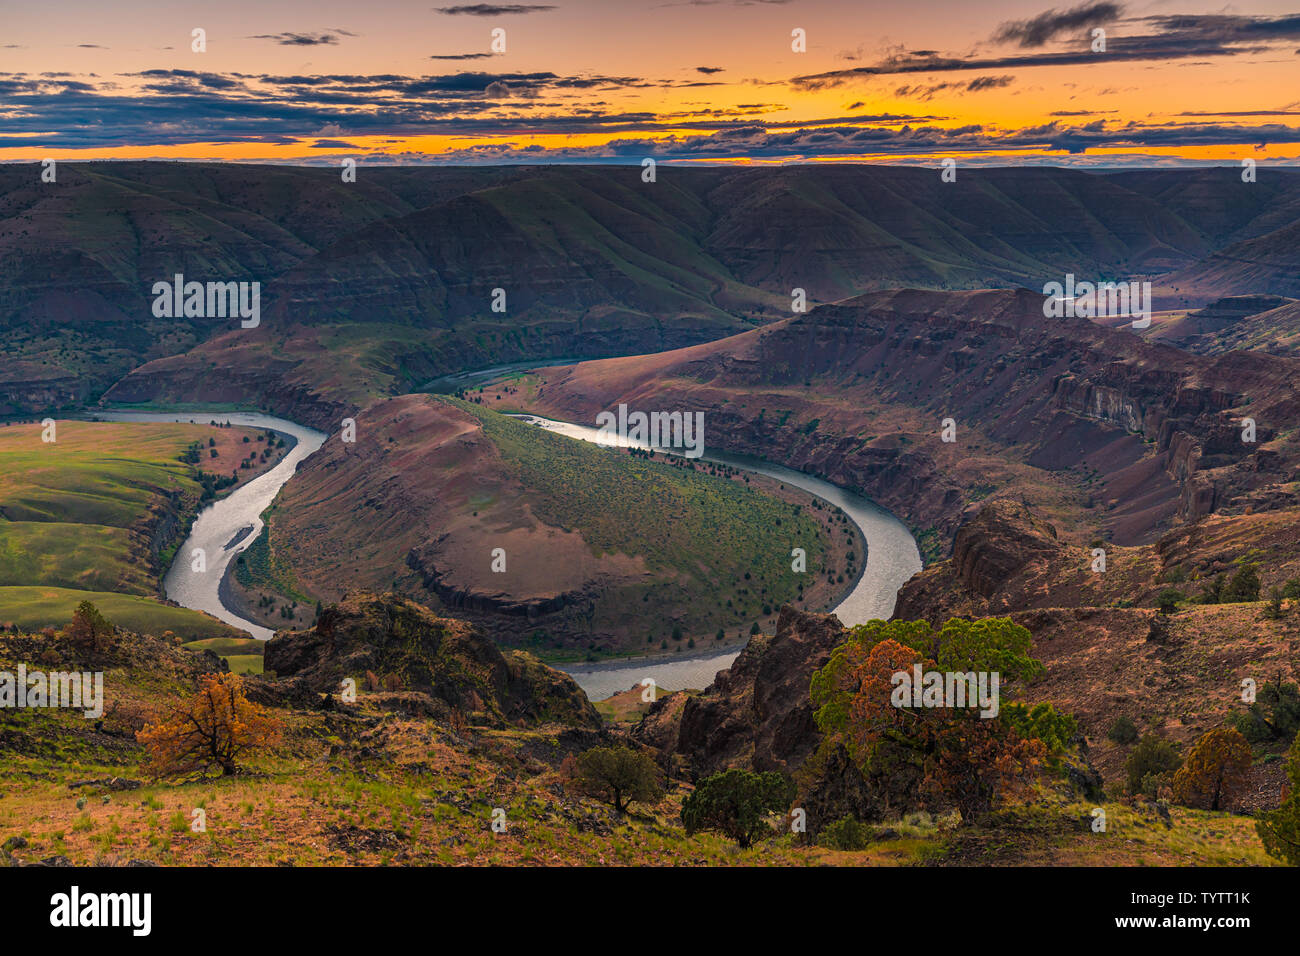 Sunset at the John Day River. The John Day River is a tributary of the Columbia River, approximately 284 miles (457 km) long, in northeastern Oregon i Stock Photo